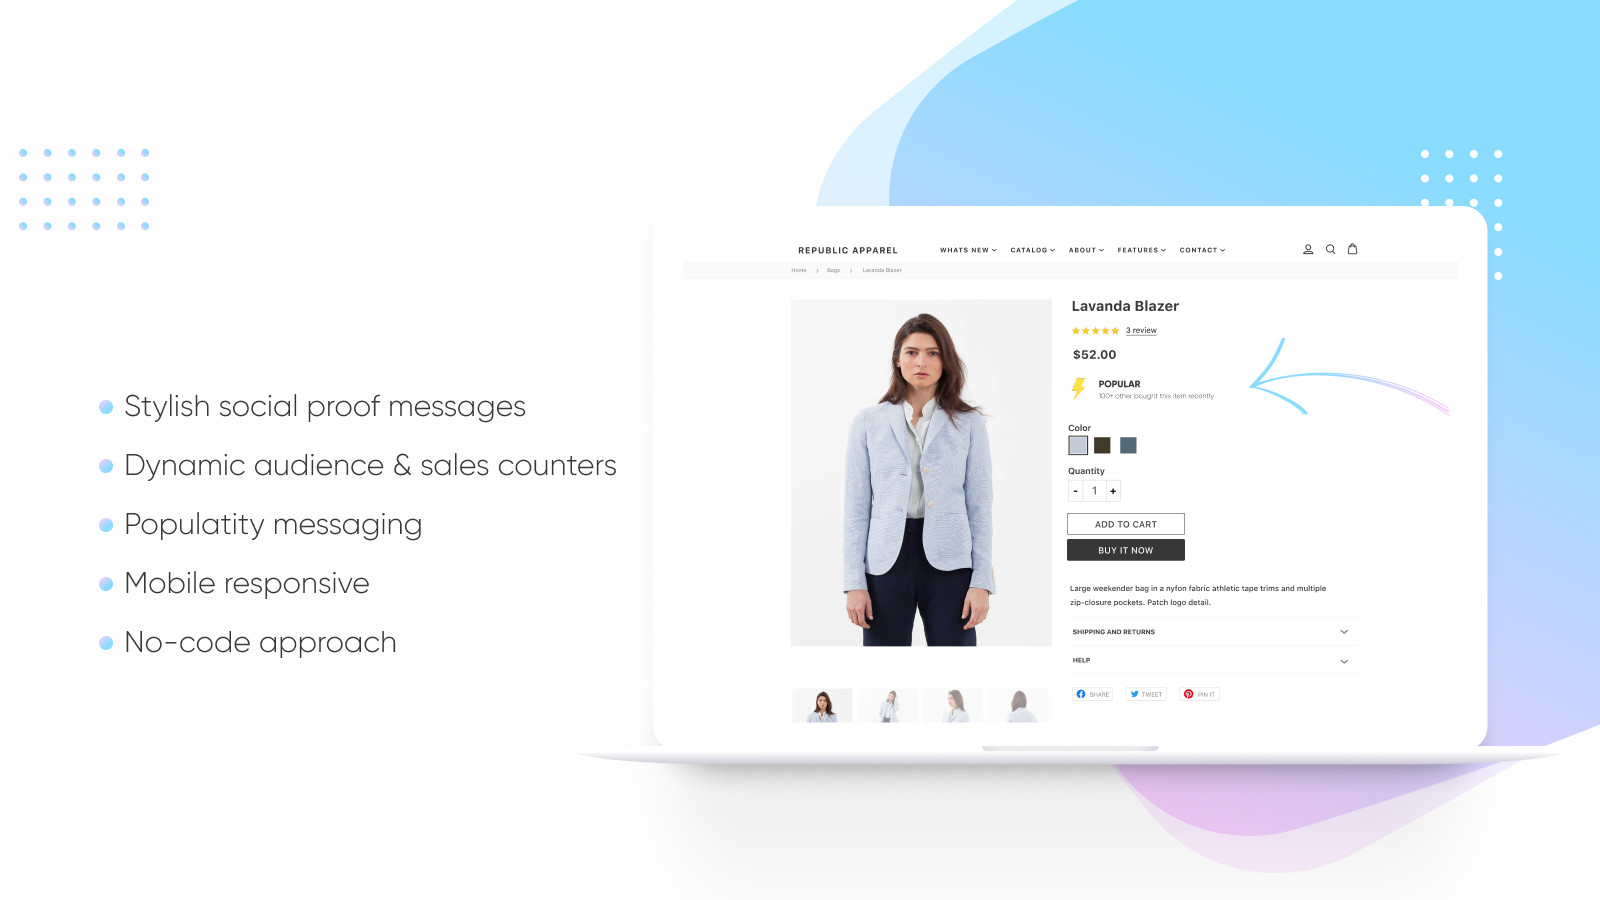 Display social proof messaging on product details